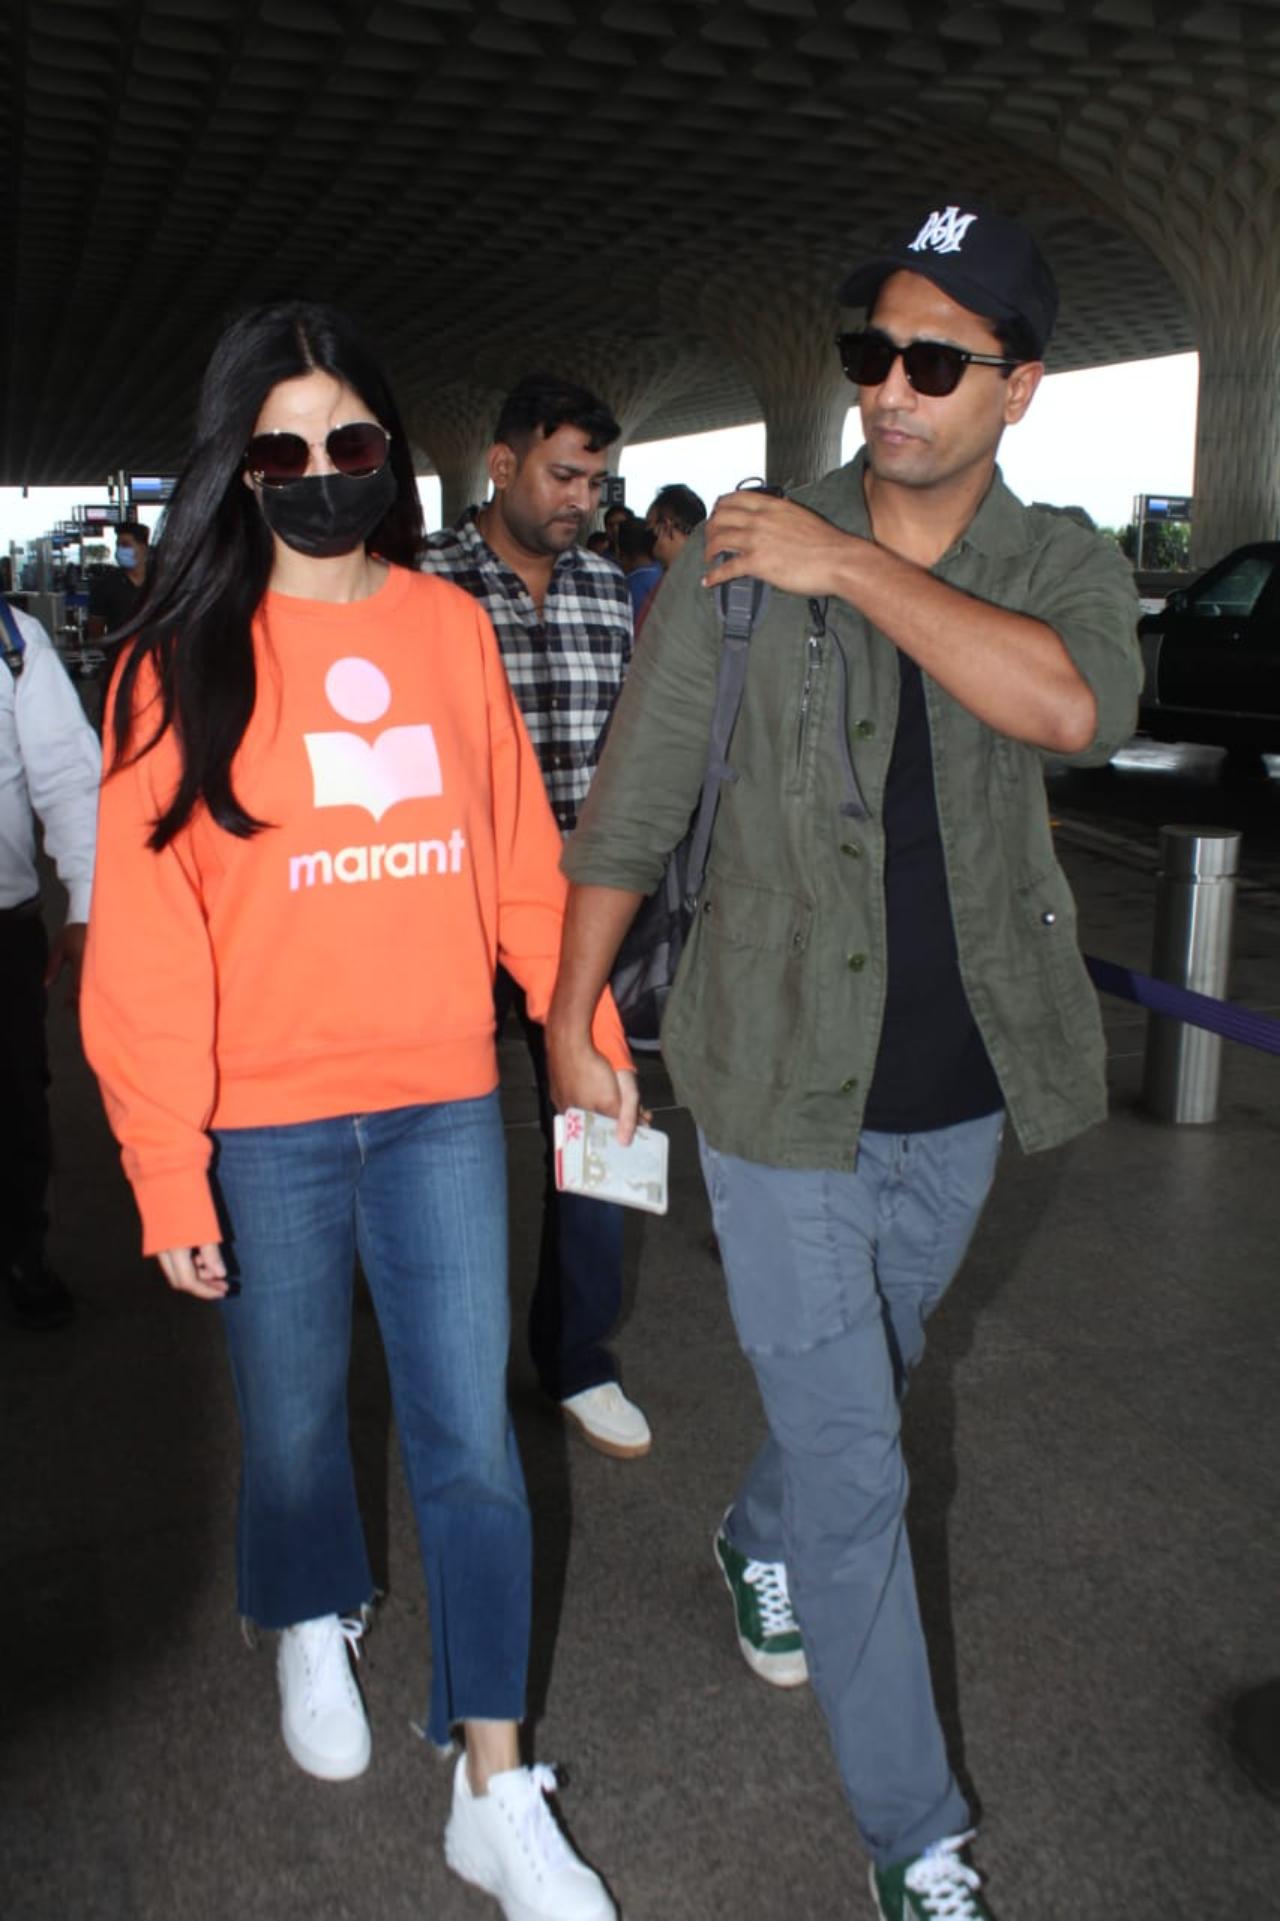 On Friday morning, Katrina Kaif was clicked at the Mumbai airport with her husband Vicky Kaushal as the two headed to the Maldives. Dressed in orange sweatshirt and blue denim, Katrina opted for a casual look for her flight. Vicky, on the other hand, donned a clean-shaven look as he walked towards the airport holding his wife's hand. 